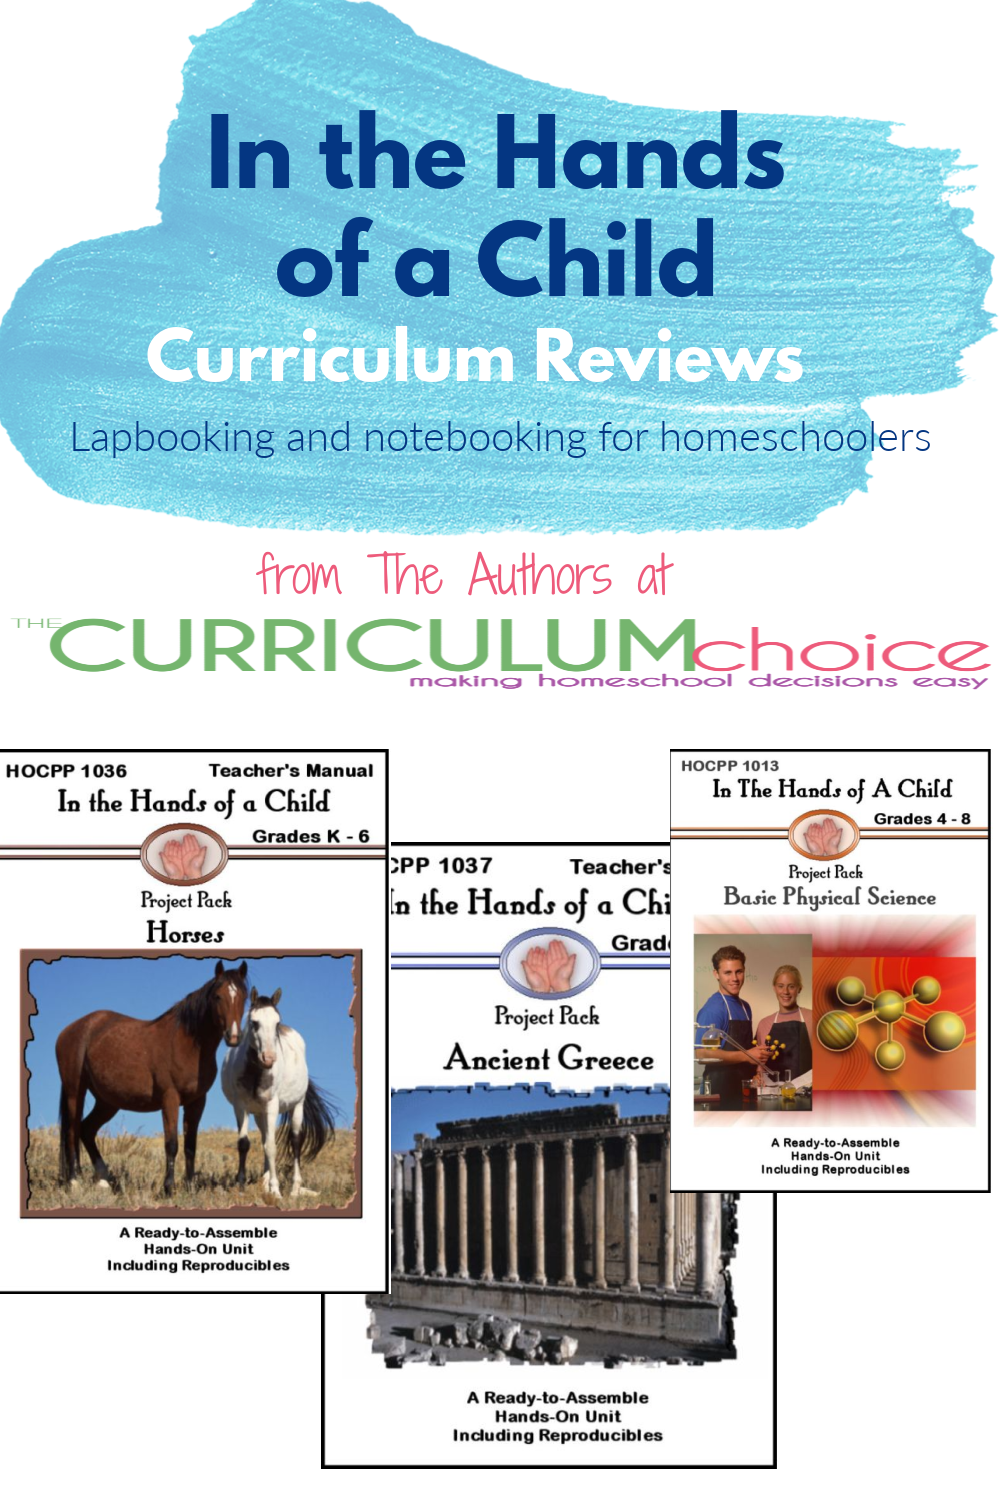 In the Hands of a Child Curriculum offers a full line of lapbooking and notebooking options for homeschoolers in grades preK-12. There are options for math, science, history, language arts, holidays, just for fun and more! Find out all about their products and read multiple reviews of different products they offer from the authors at The Curriculum Choice.